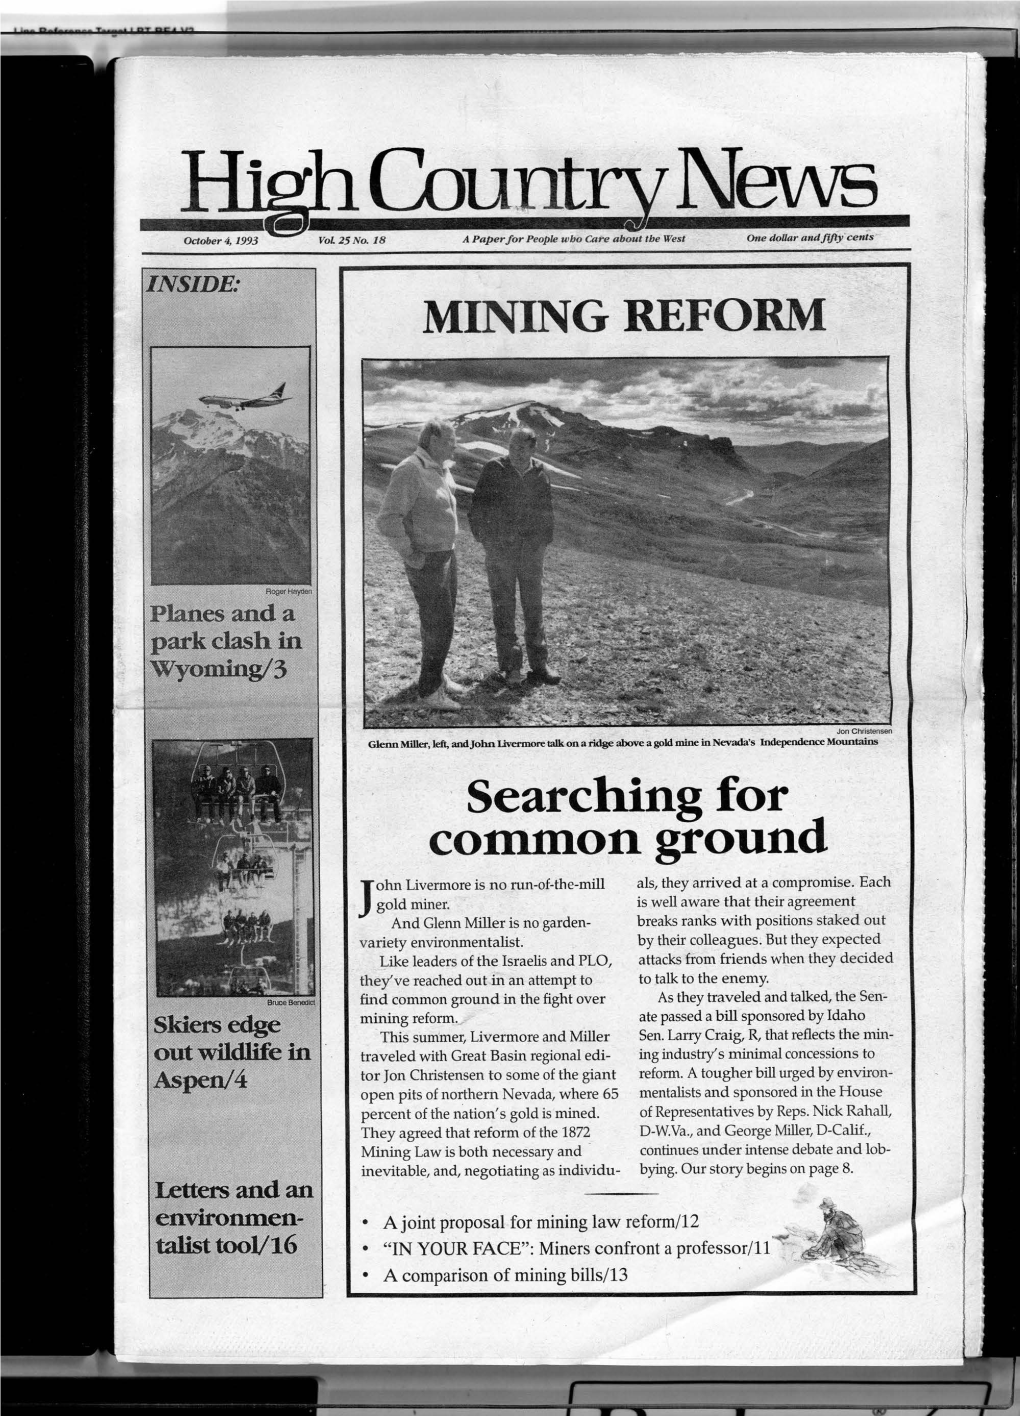 High Country News Vol. 25.18, Oct. 4, 1993